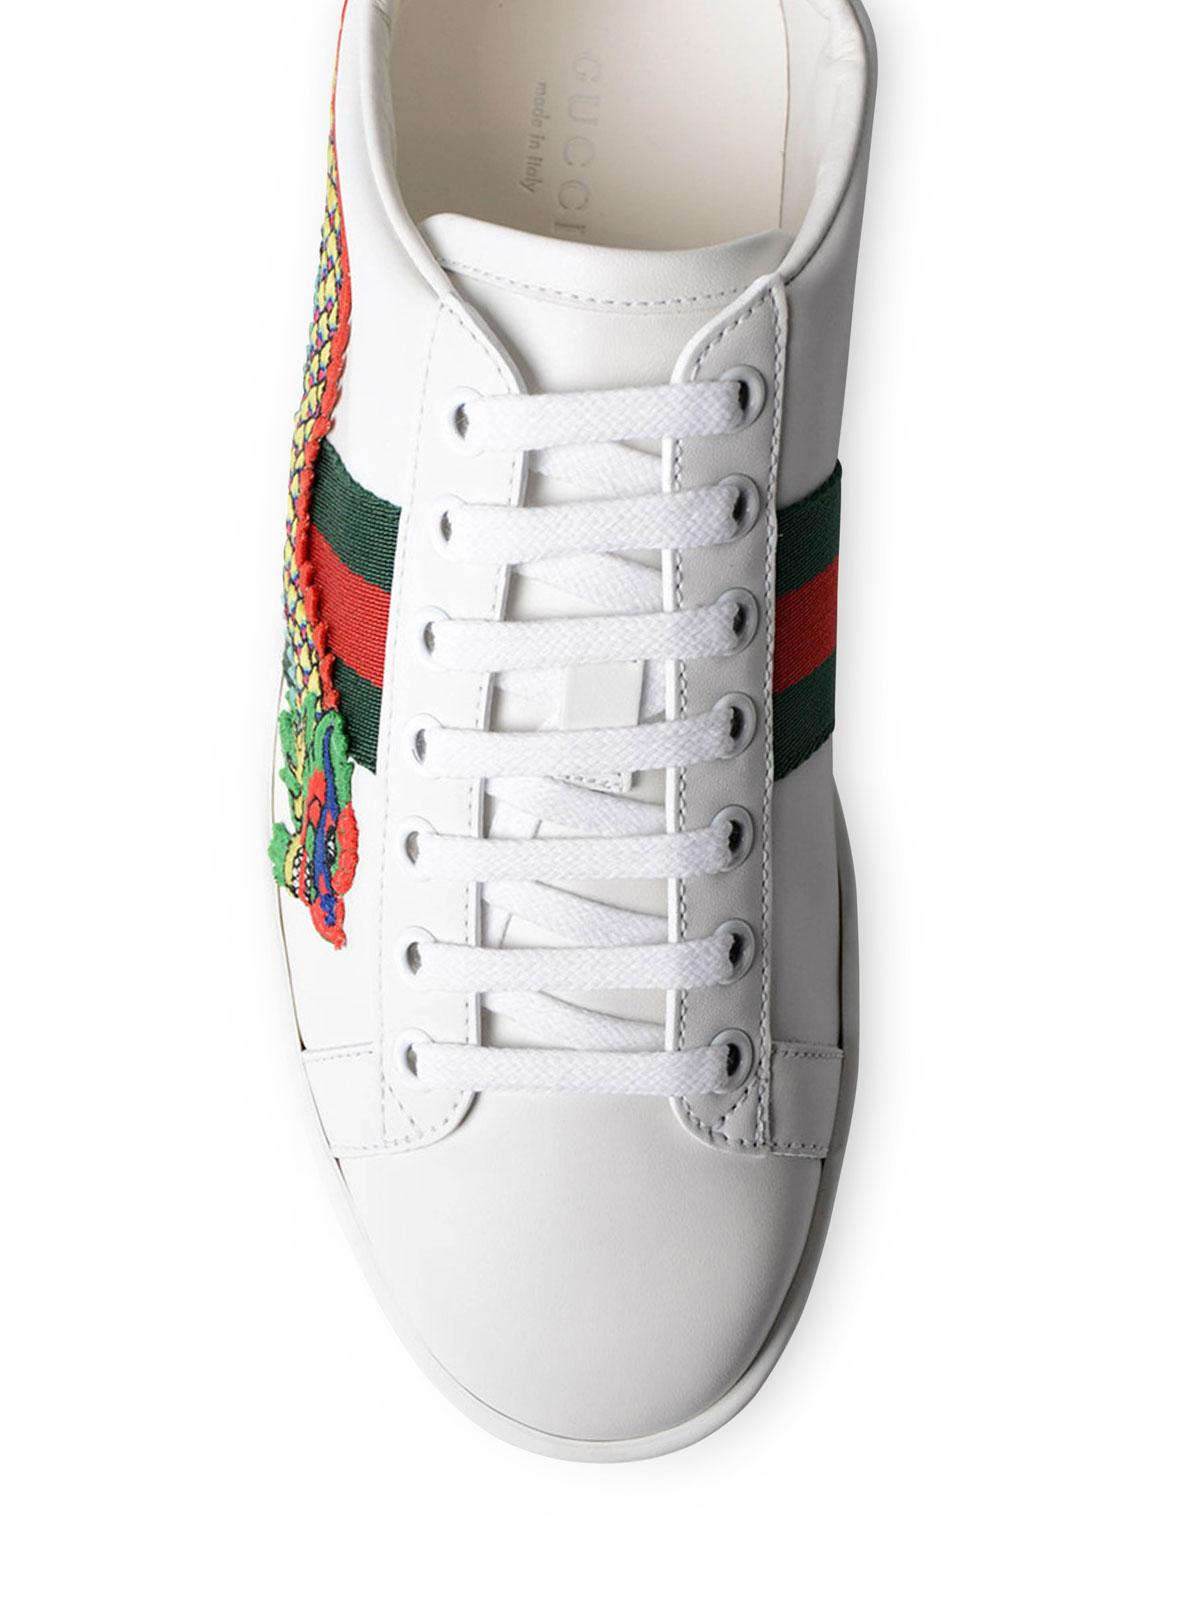 engagement notifikation Flock Trainers Gucci - Ace embroidered low top sneakers - 475221A38G09064